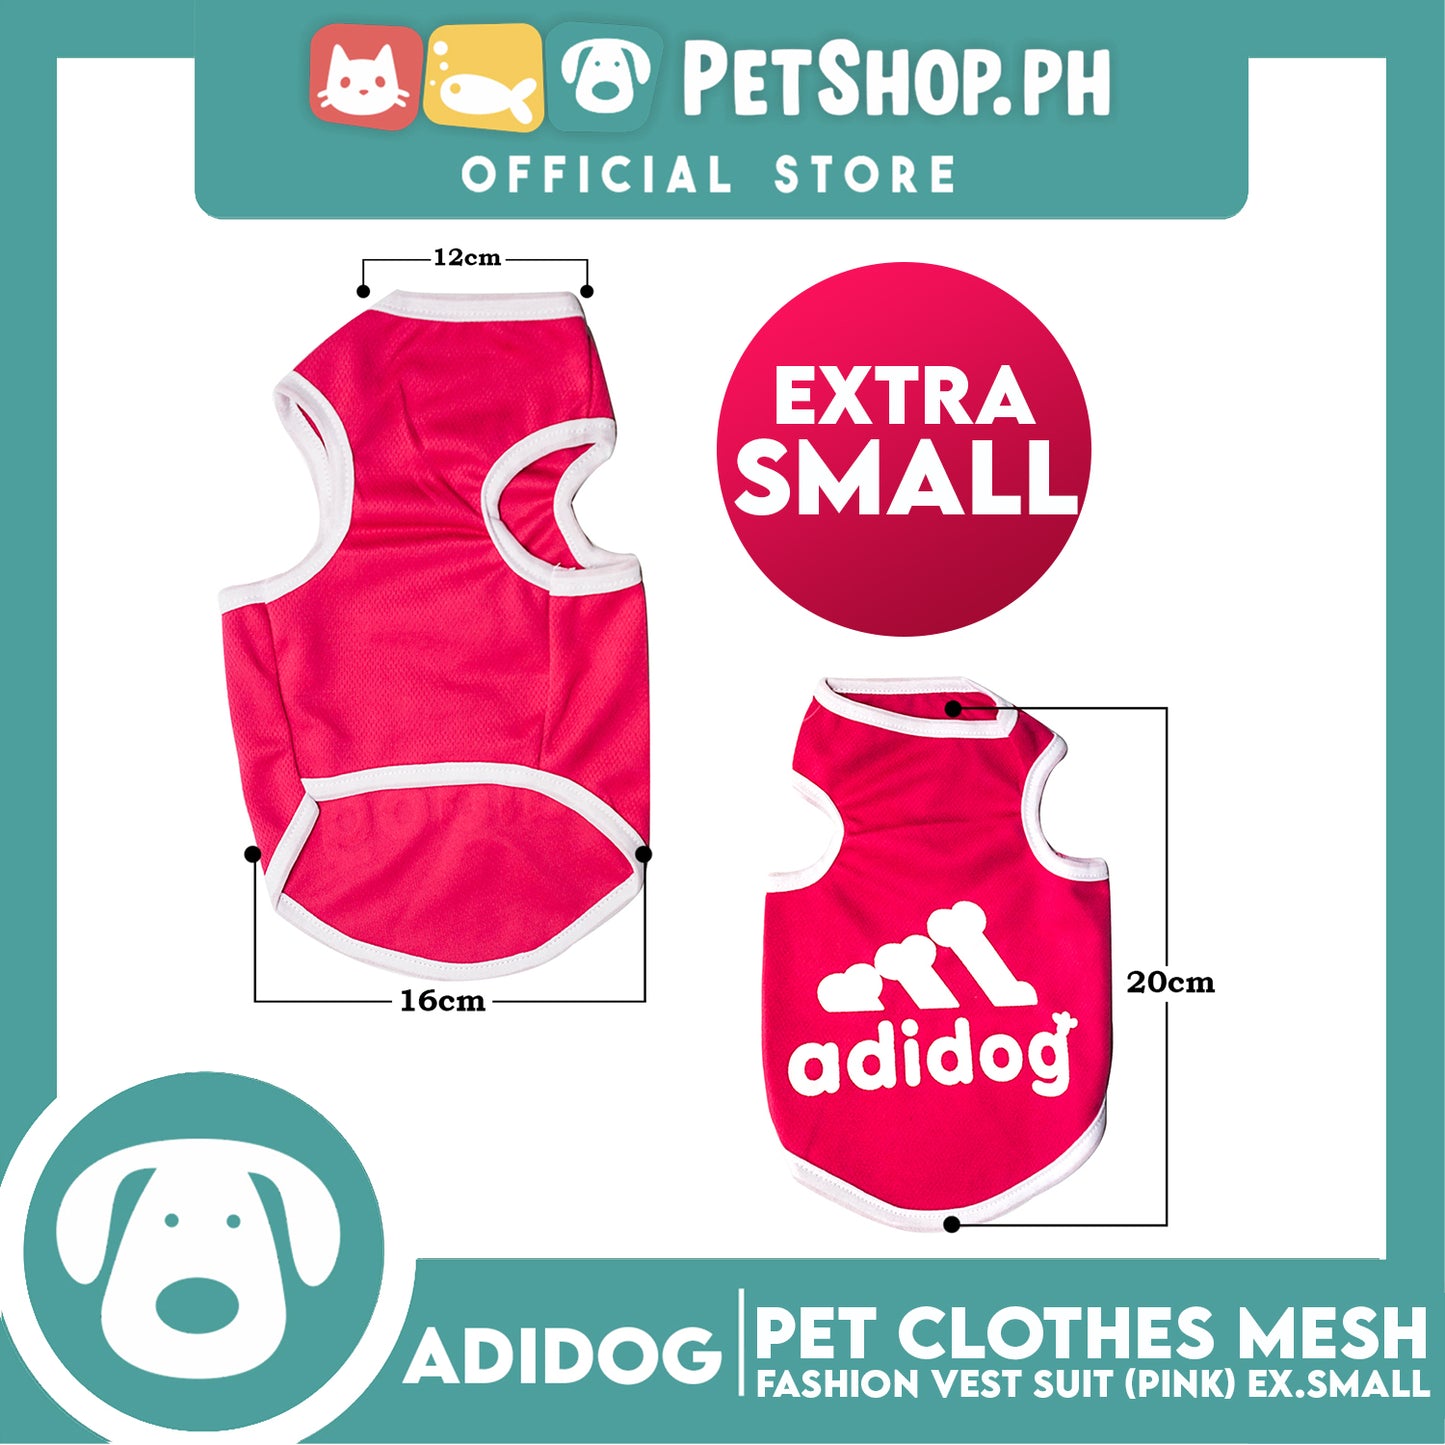 Adidog Pet Clothes Mesh Vet, Summer Dog Clothes, Breathable Mesh Vet, Dog Shirt, Pet Jersey, Fashion Vest Suit for Dogs (Pink) (Extra Small)